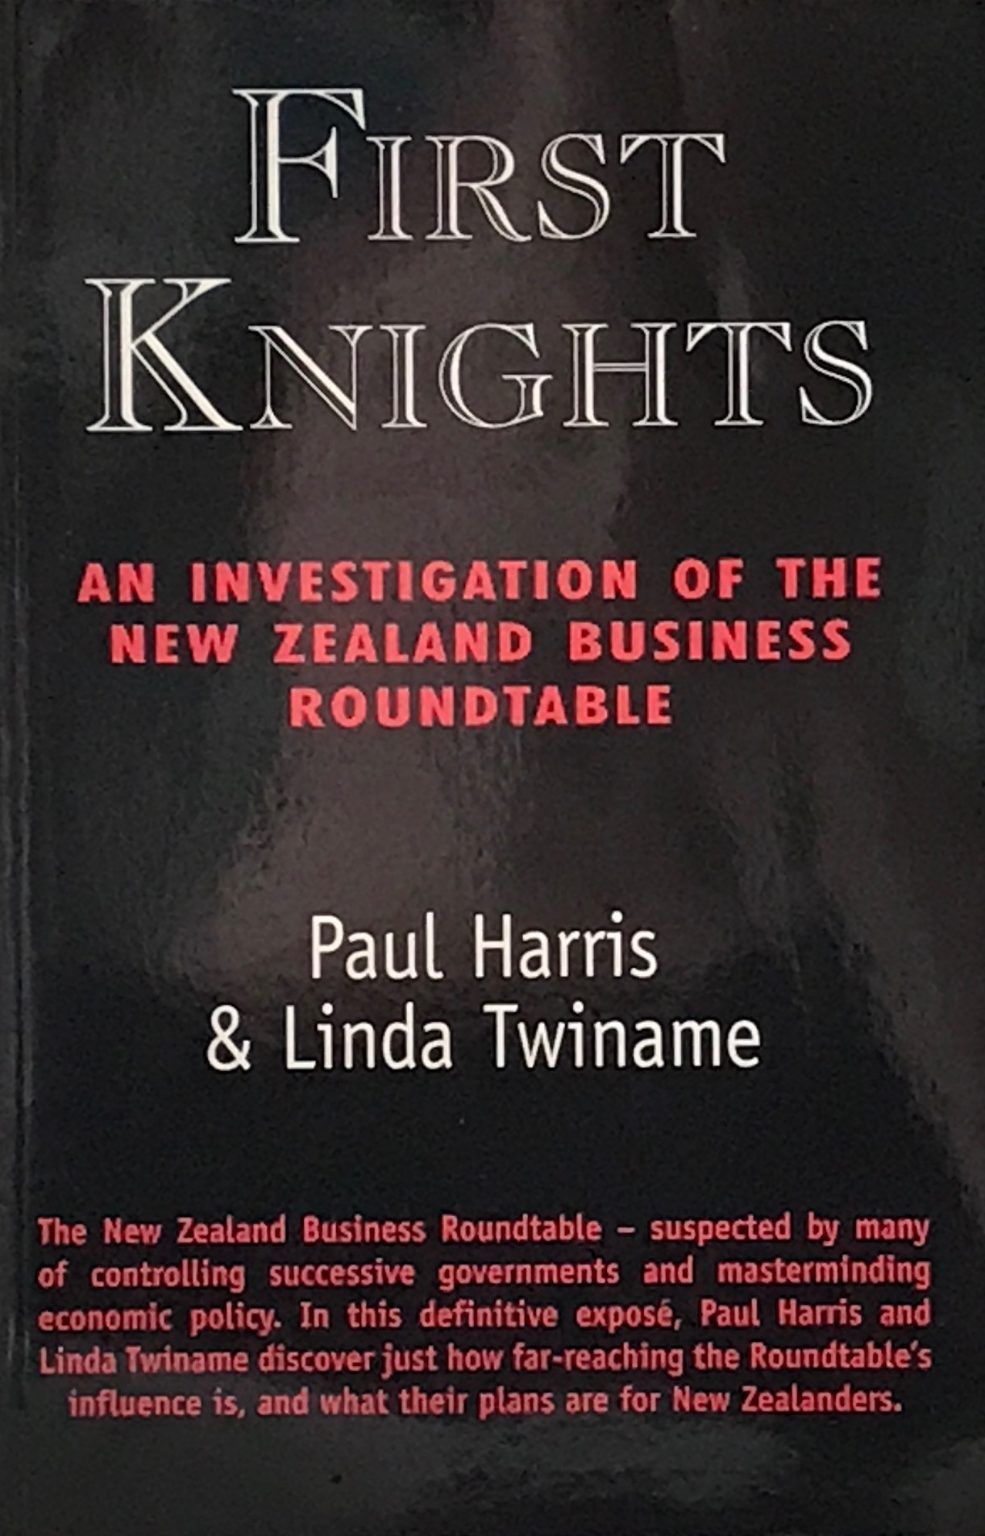 FIRST KNIGHTS: An Investigation of The New Zealand Business Roundtable